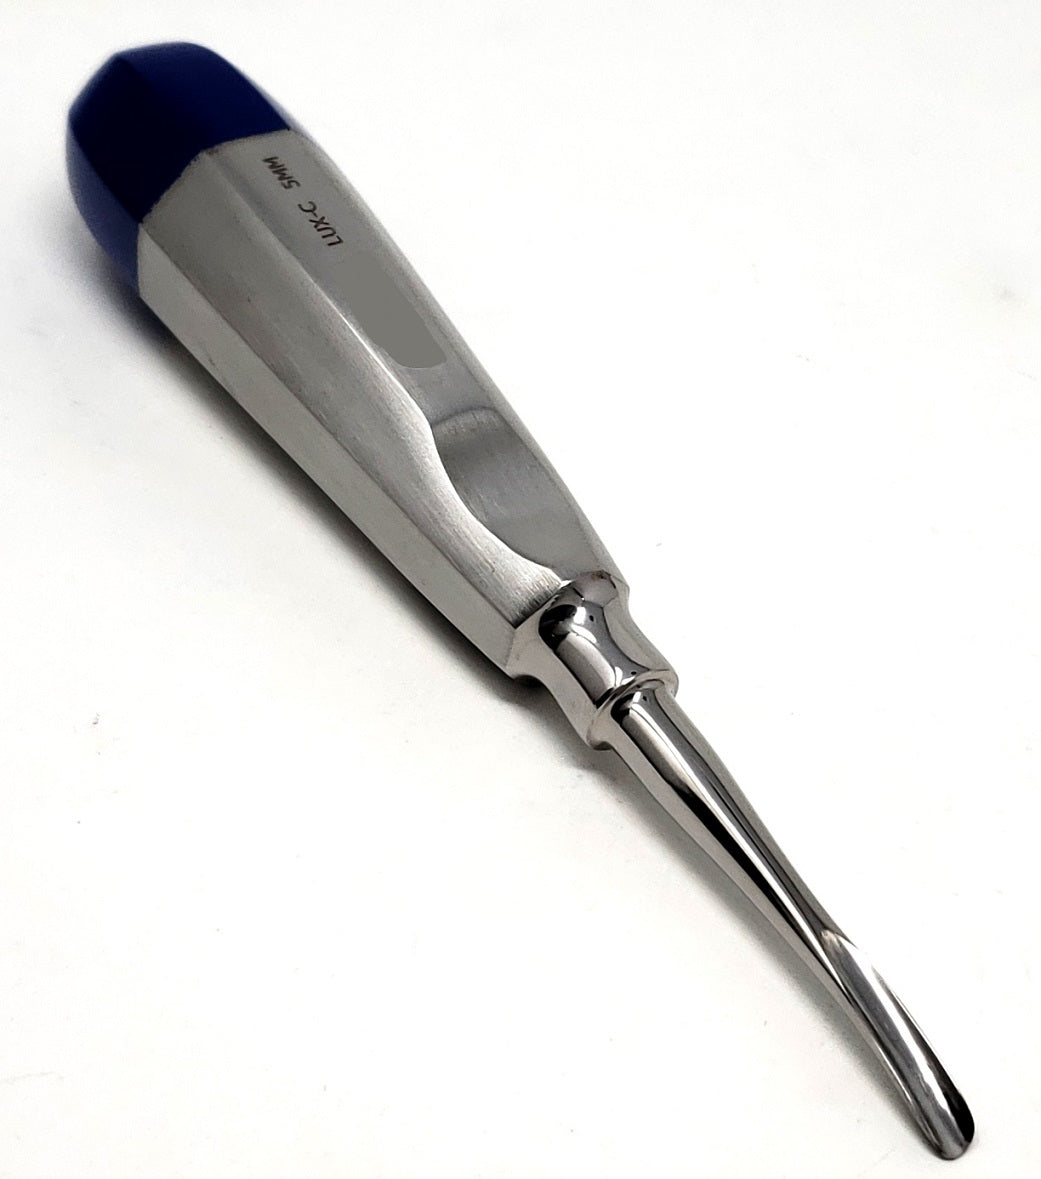 Dental Luxating Elevator Curved 5mm, Blue Handle, Stainless Steel